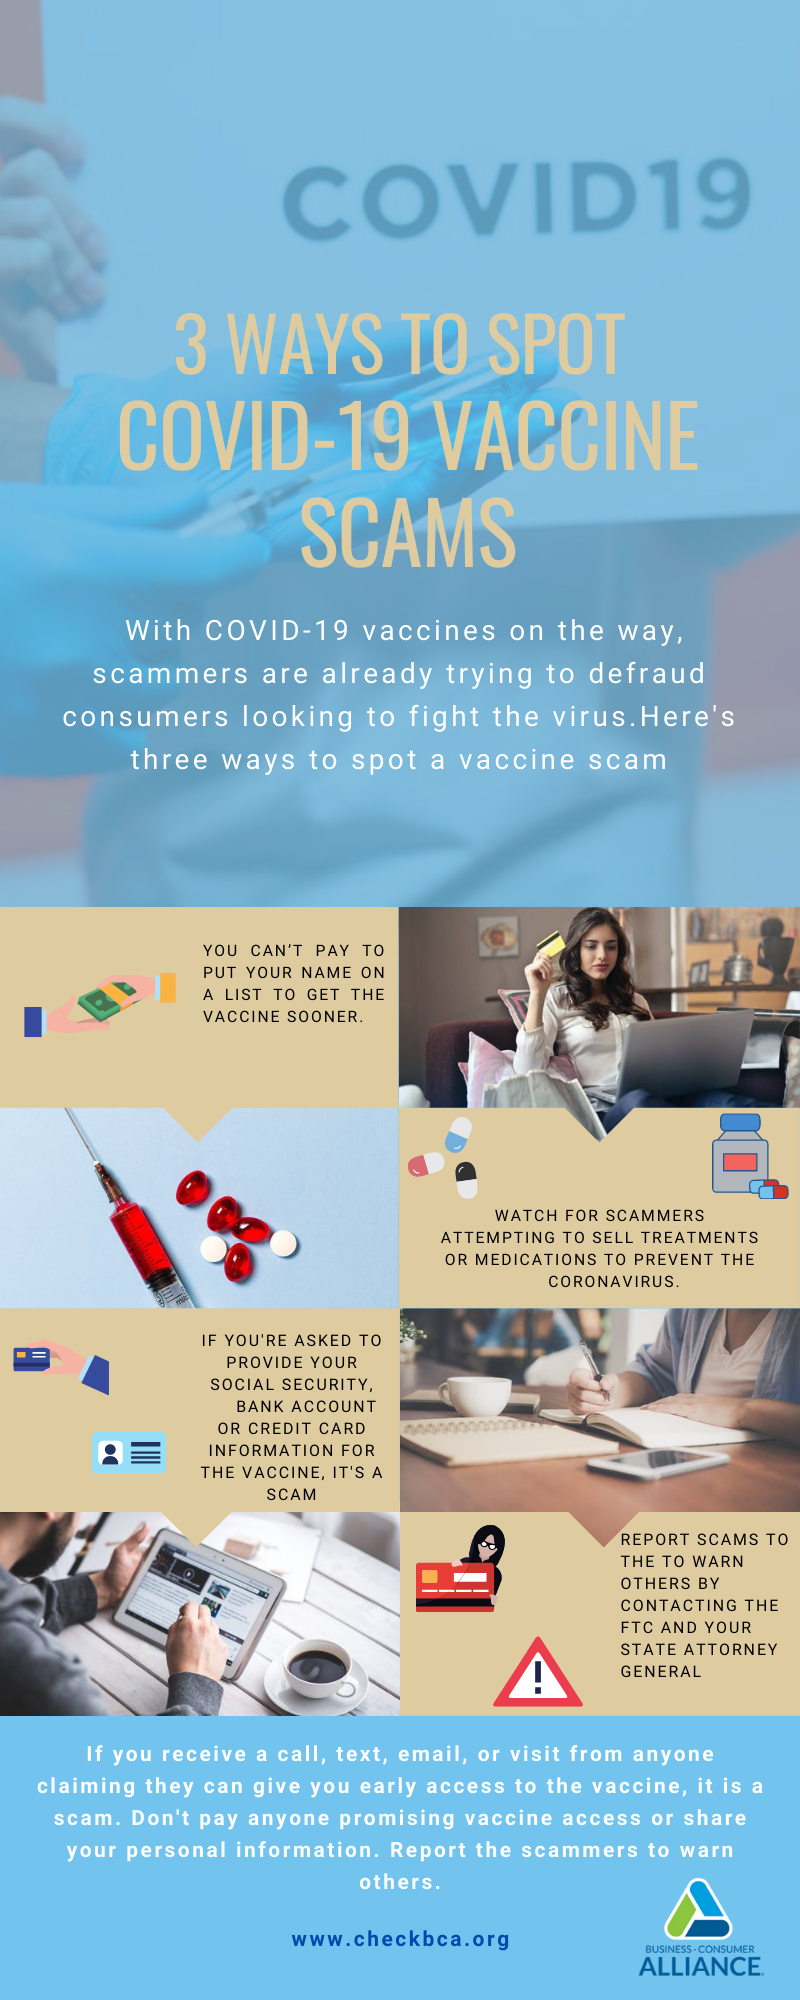 3 Ways To Spot COVID-19 Vaccine Scam